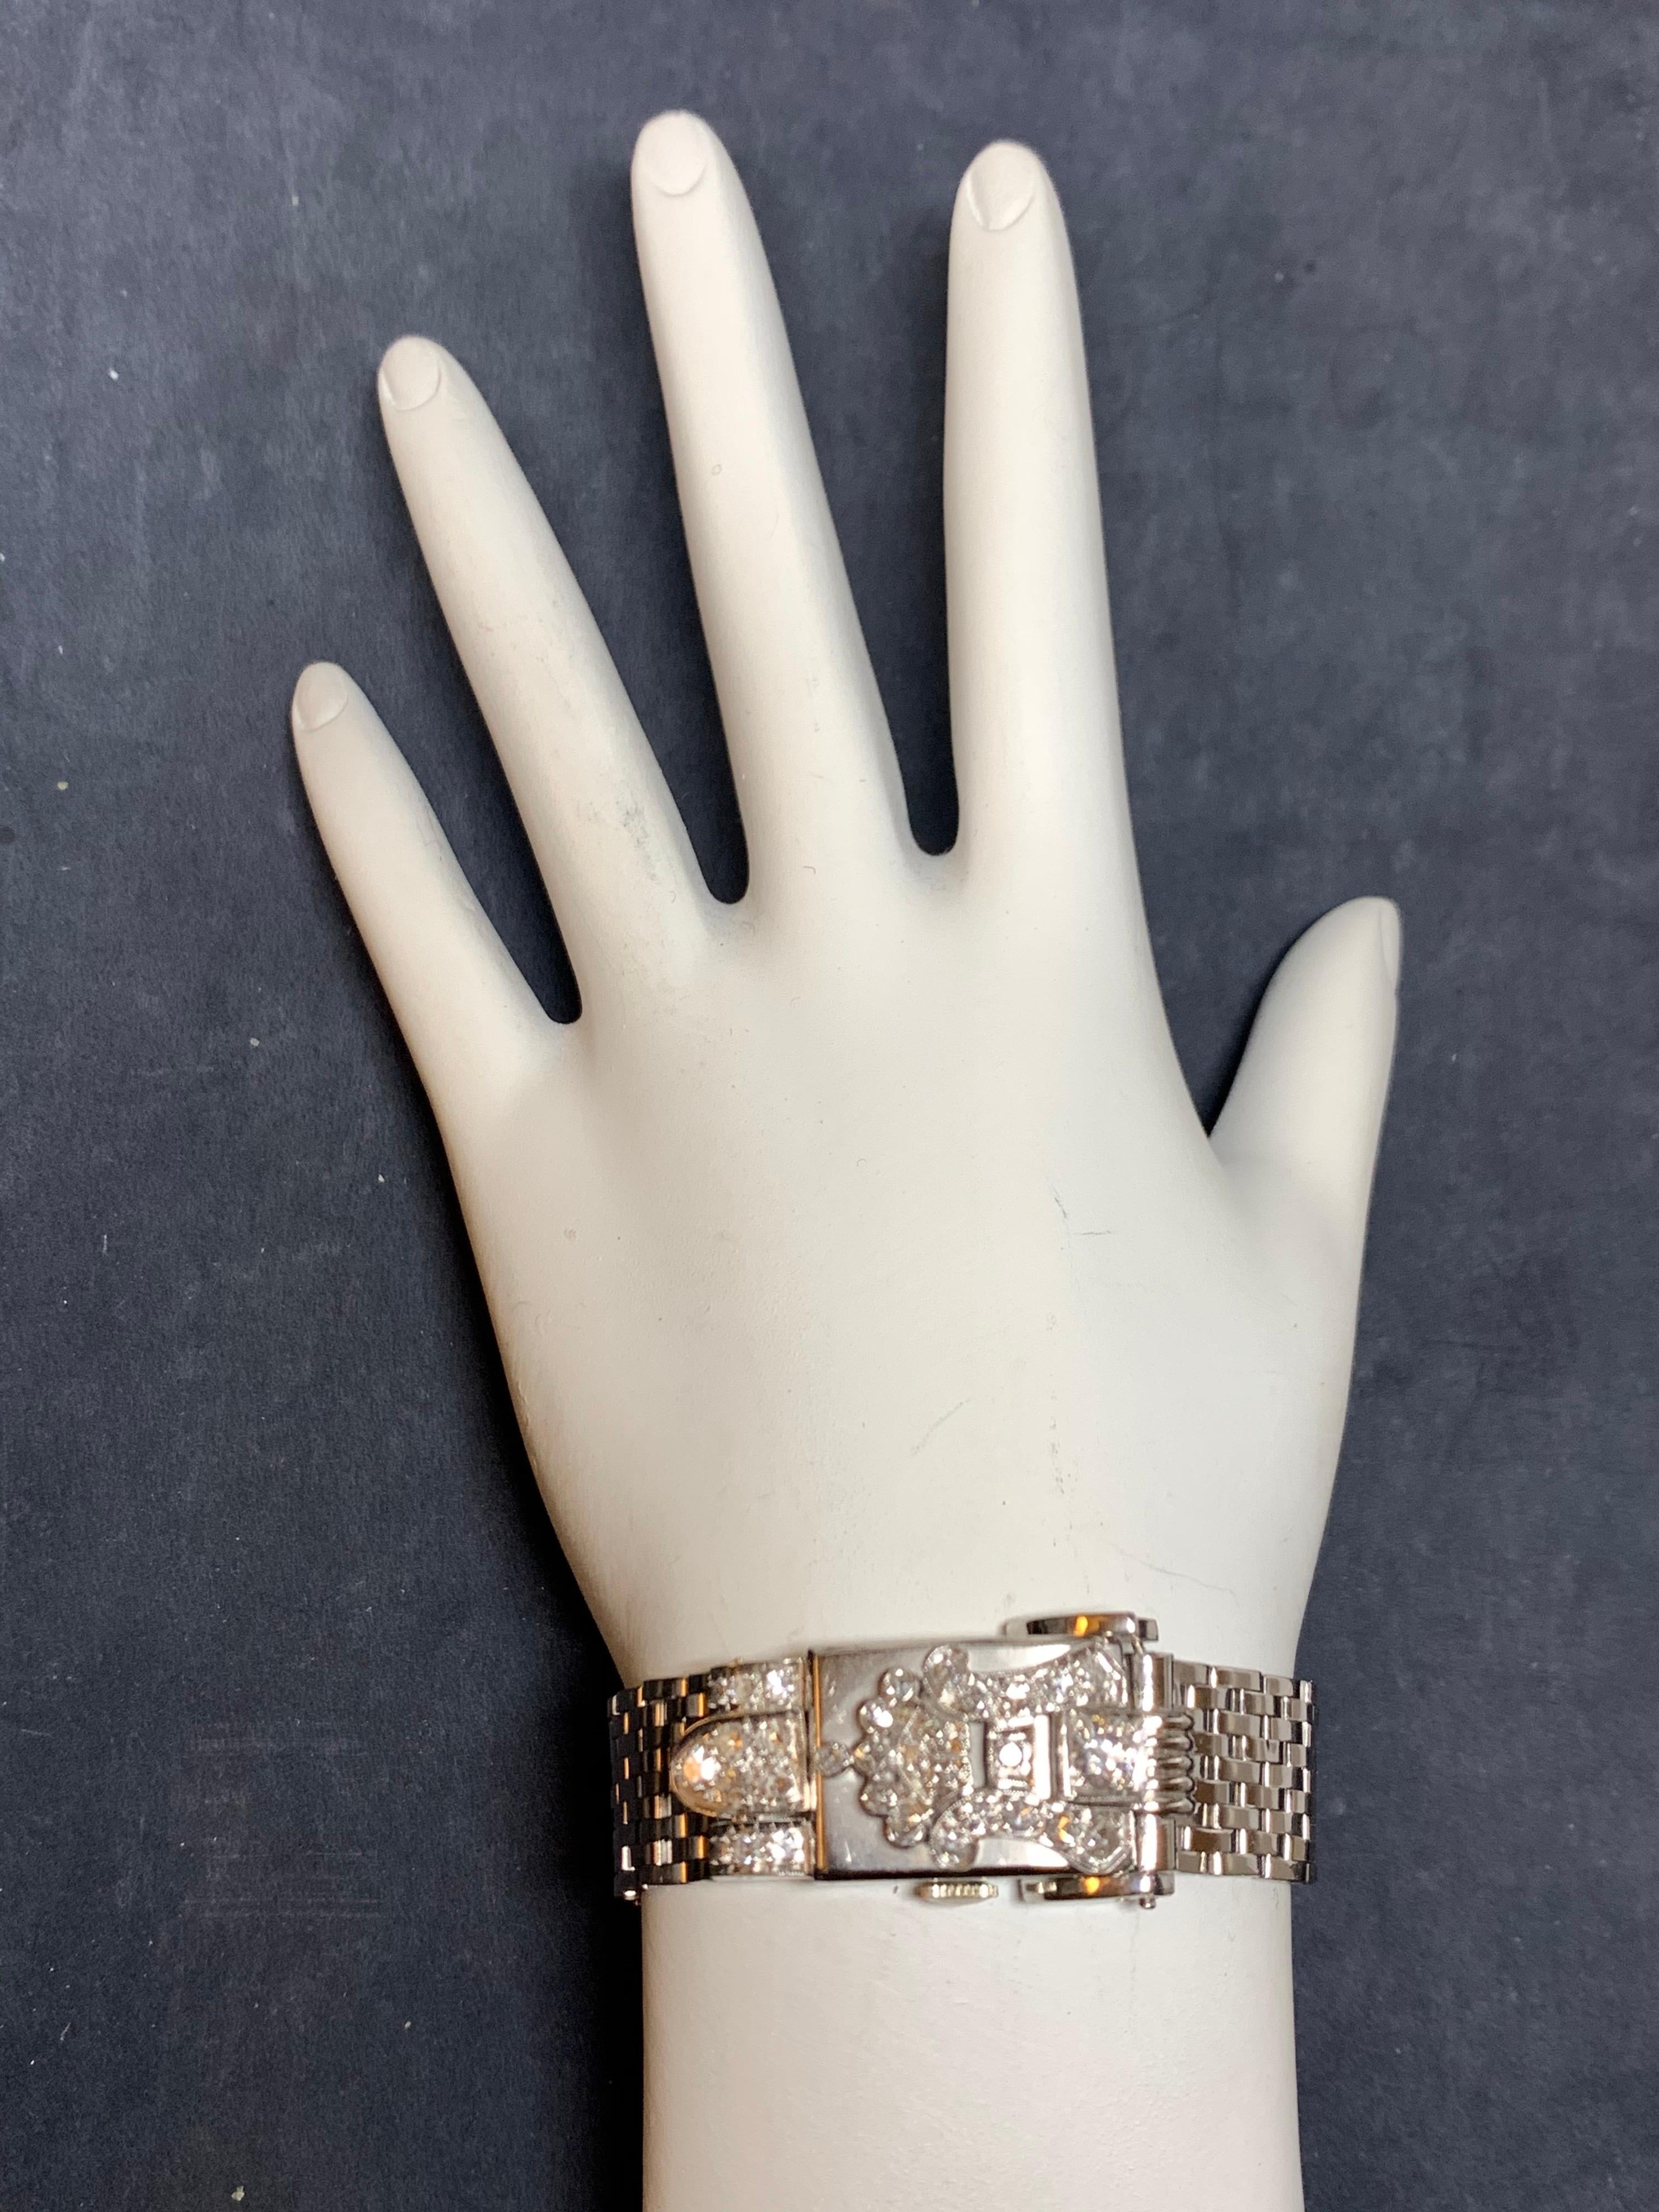 Rare Ladies Collectable Geneva Platinum set with approximately 0.60 carat of Natural Diamonds, Manual Wind Pop-Up Cocktail Watch. 
 
It is set with 32 natural colorless diamonds weighing approximately 0.60 carats, the watch itself weighs 52.2 grams